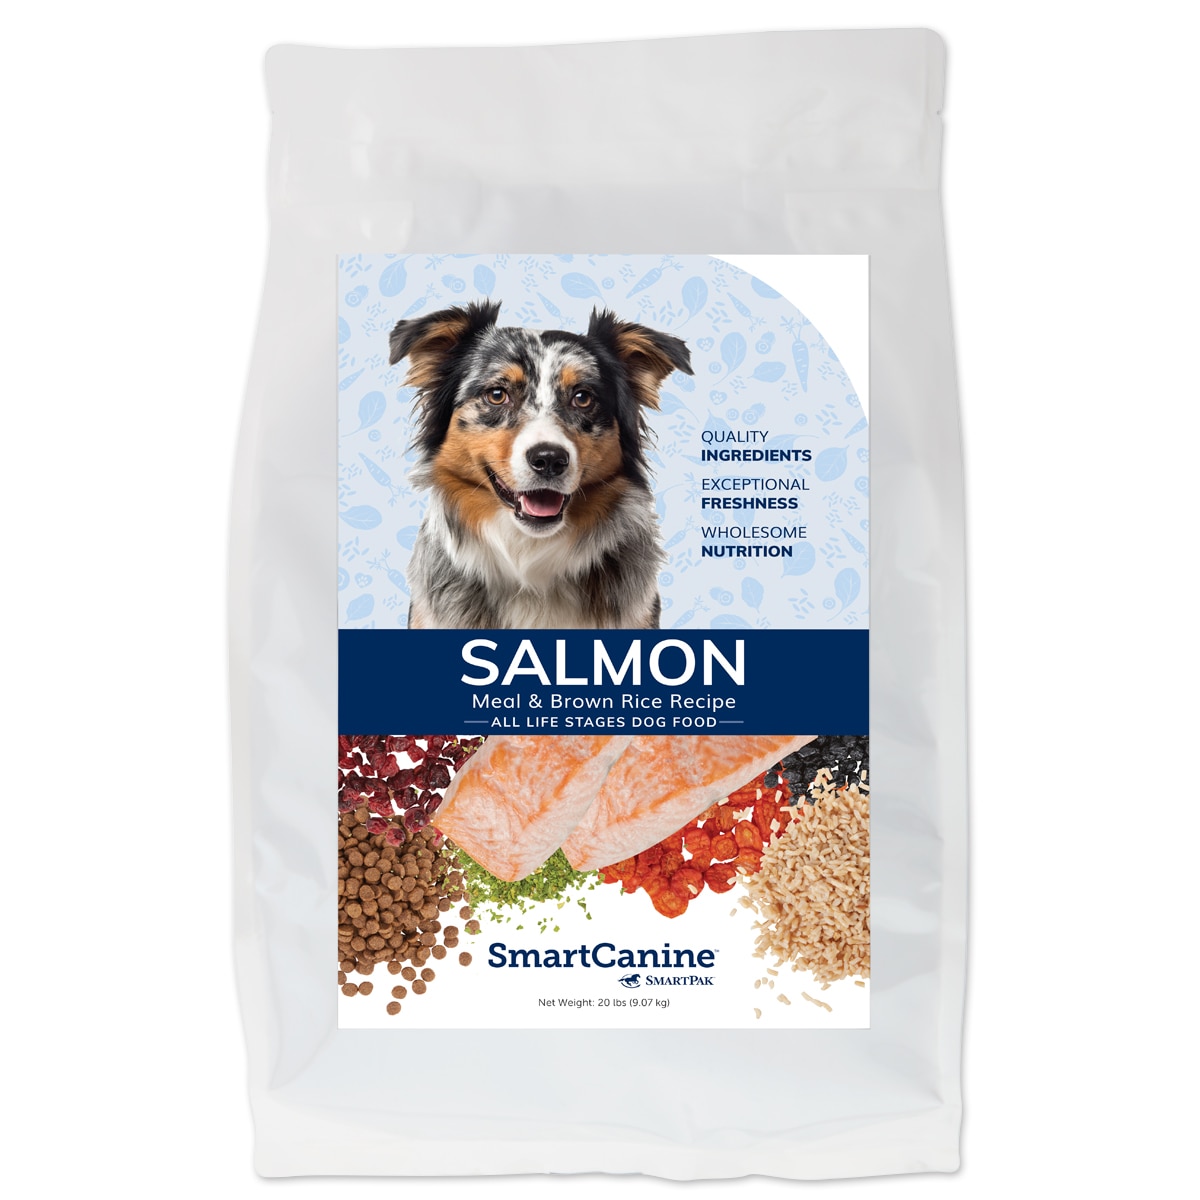 how important is senior dog food